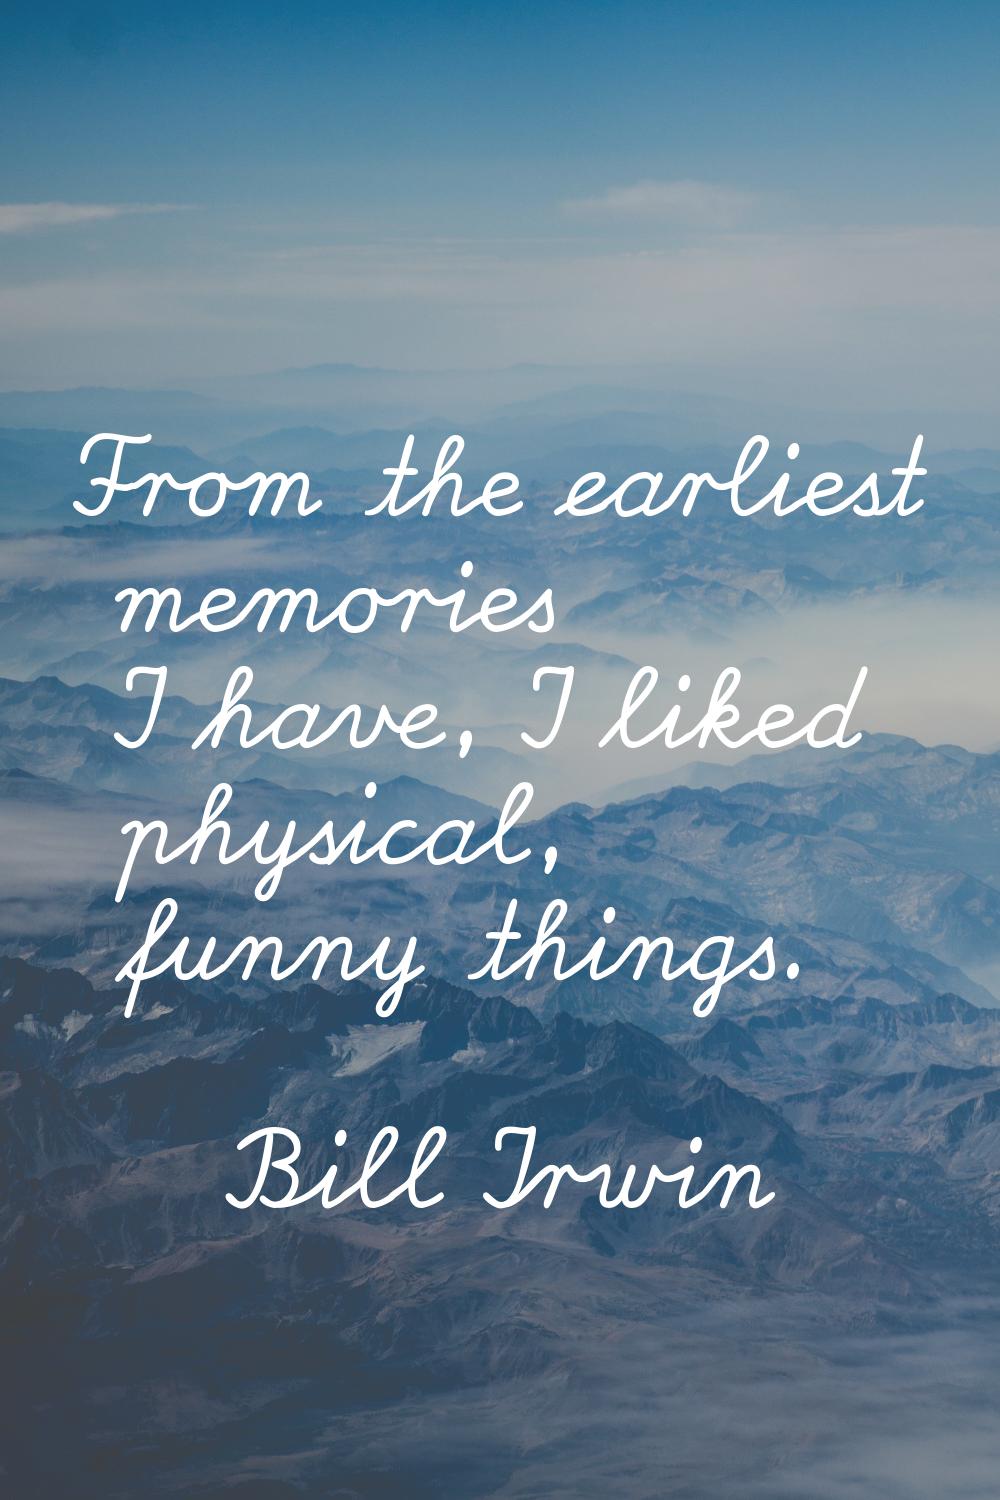 From the earliest memories I have, I liked physical, funny things.